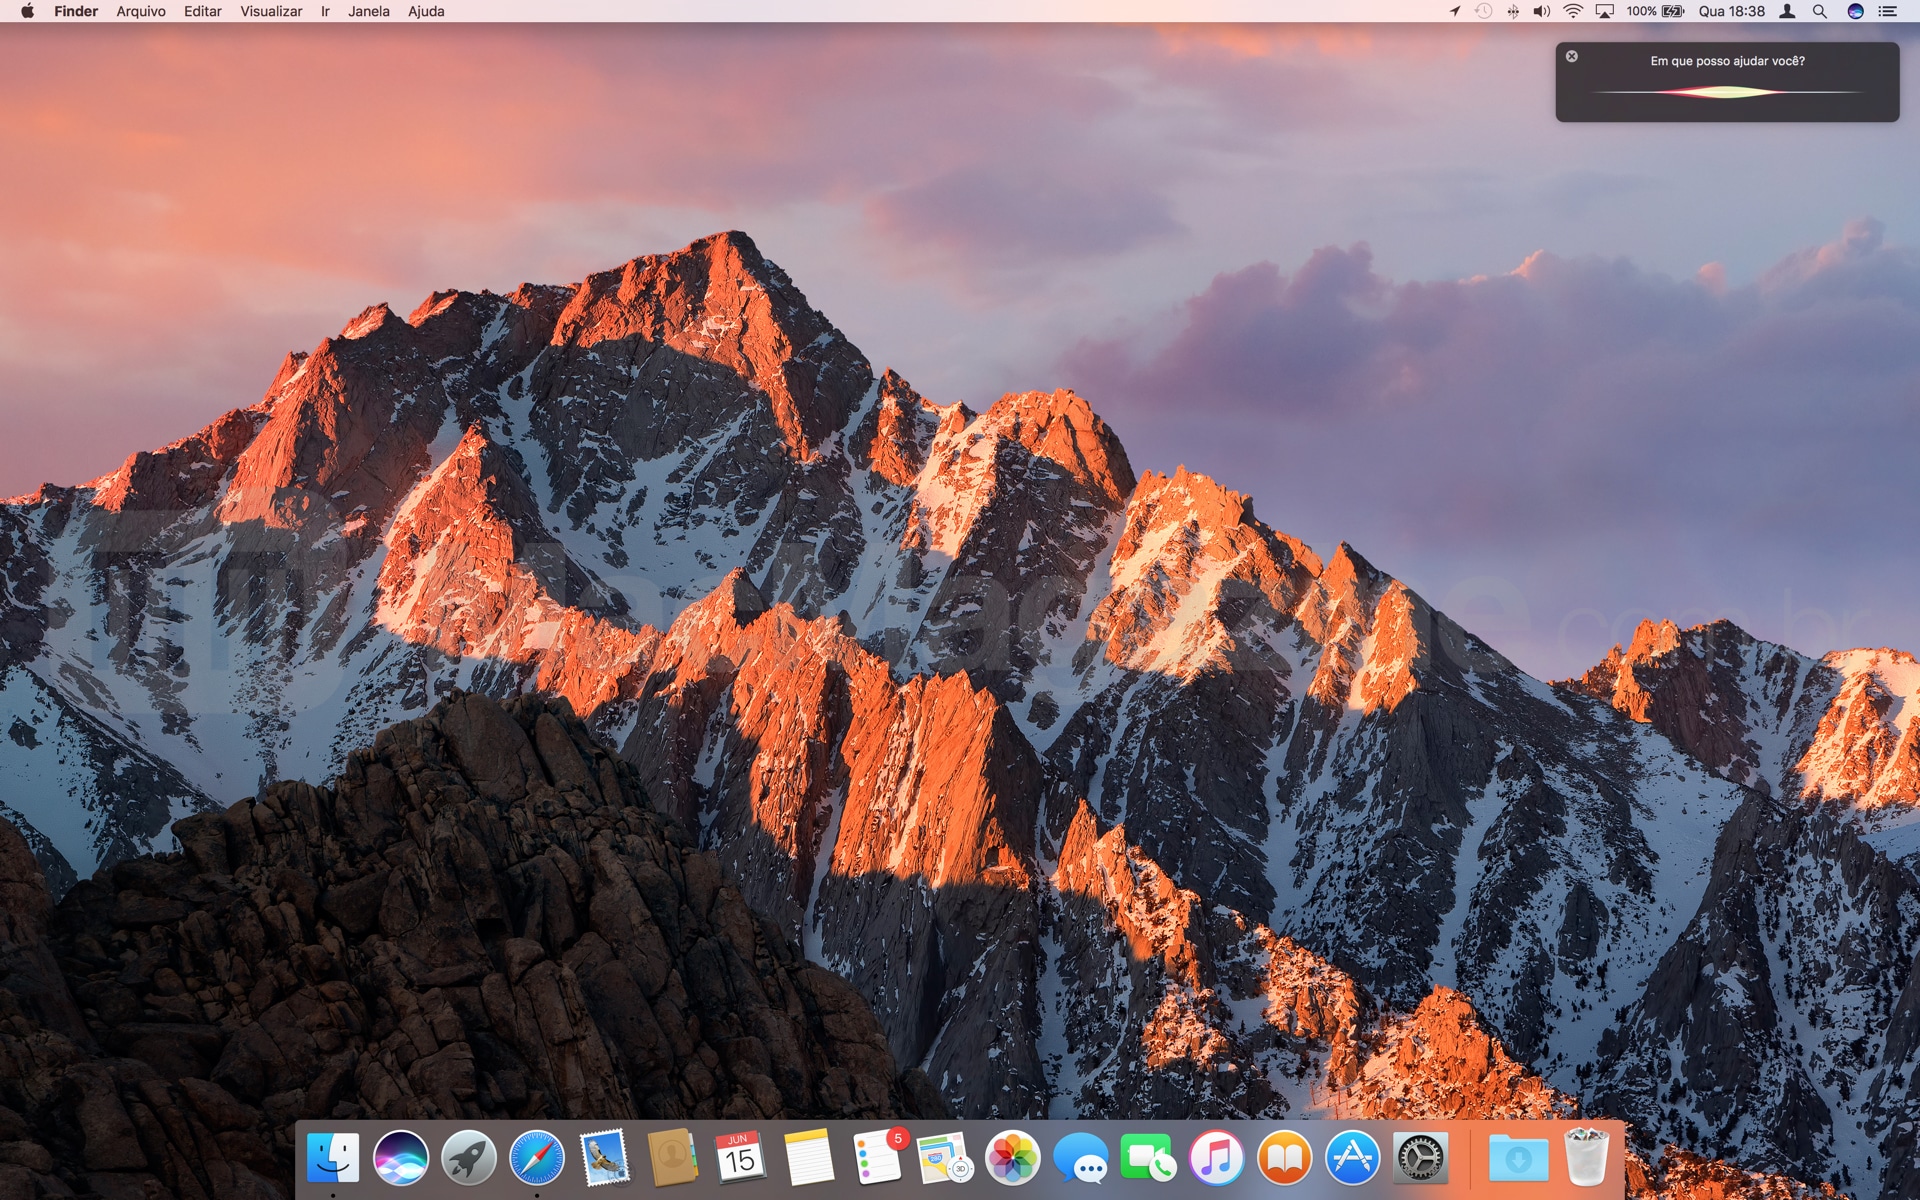 Check out the first wave of screenshots that show what's new in macOS Sierra!